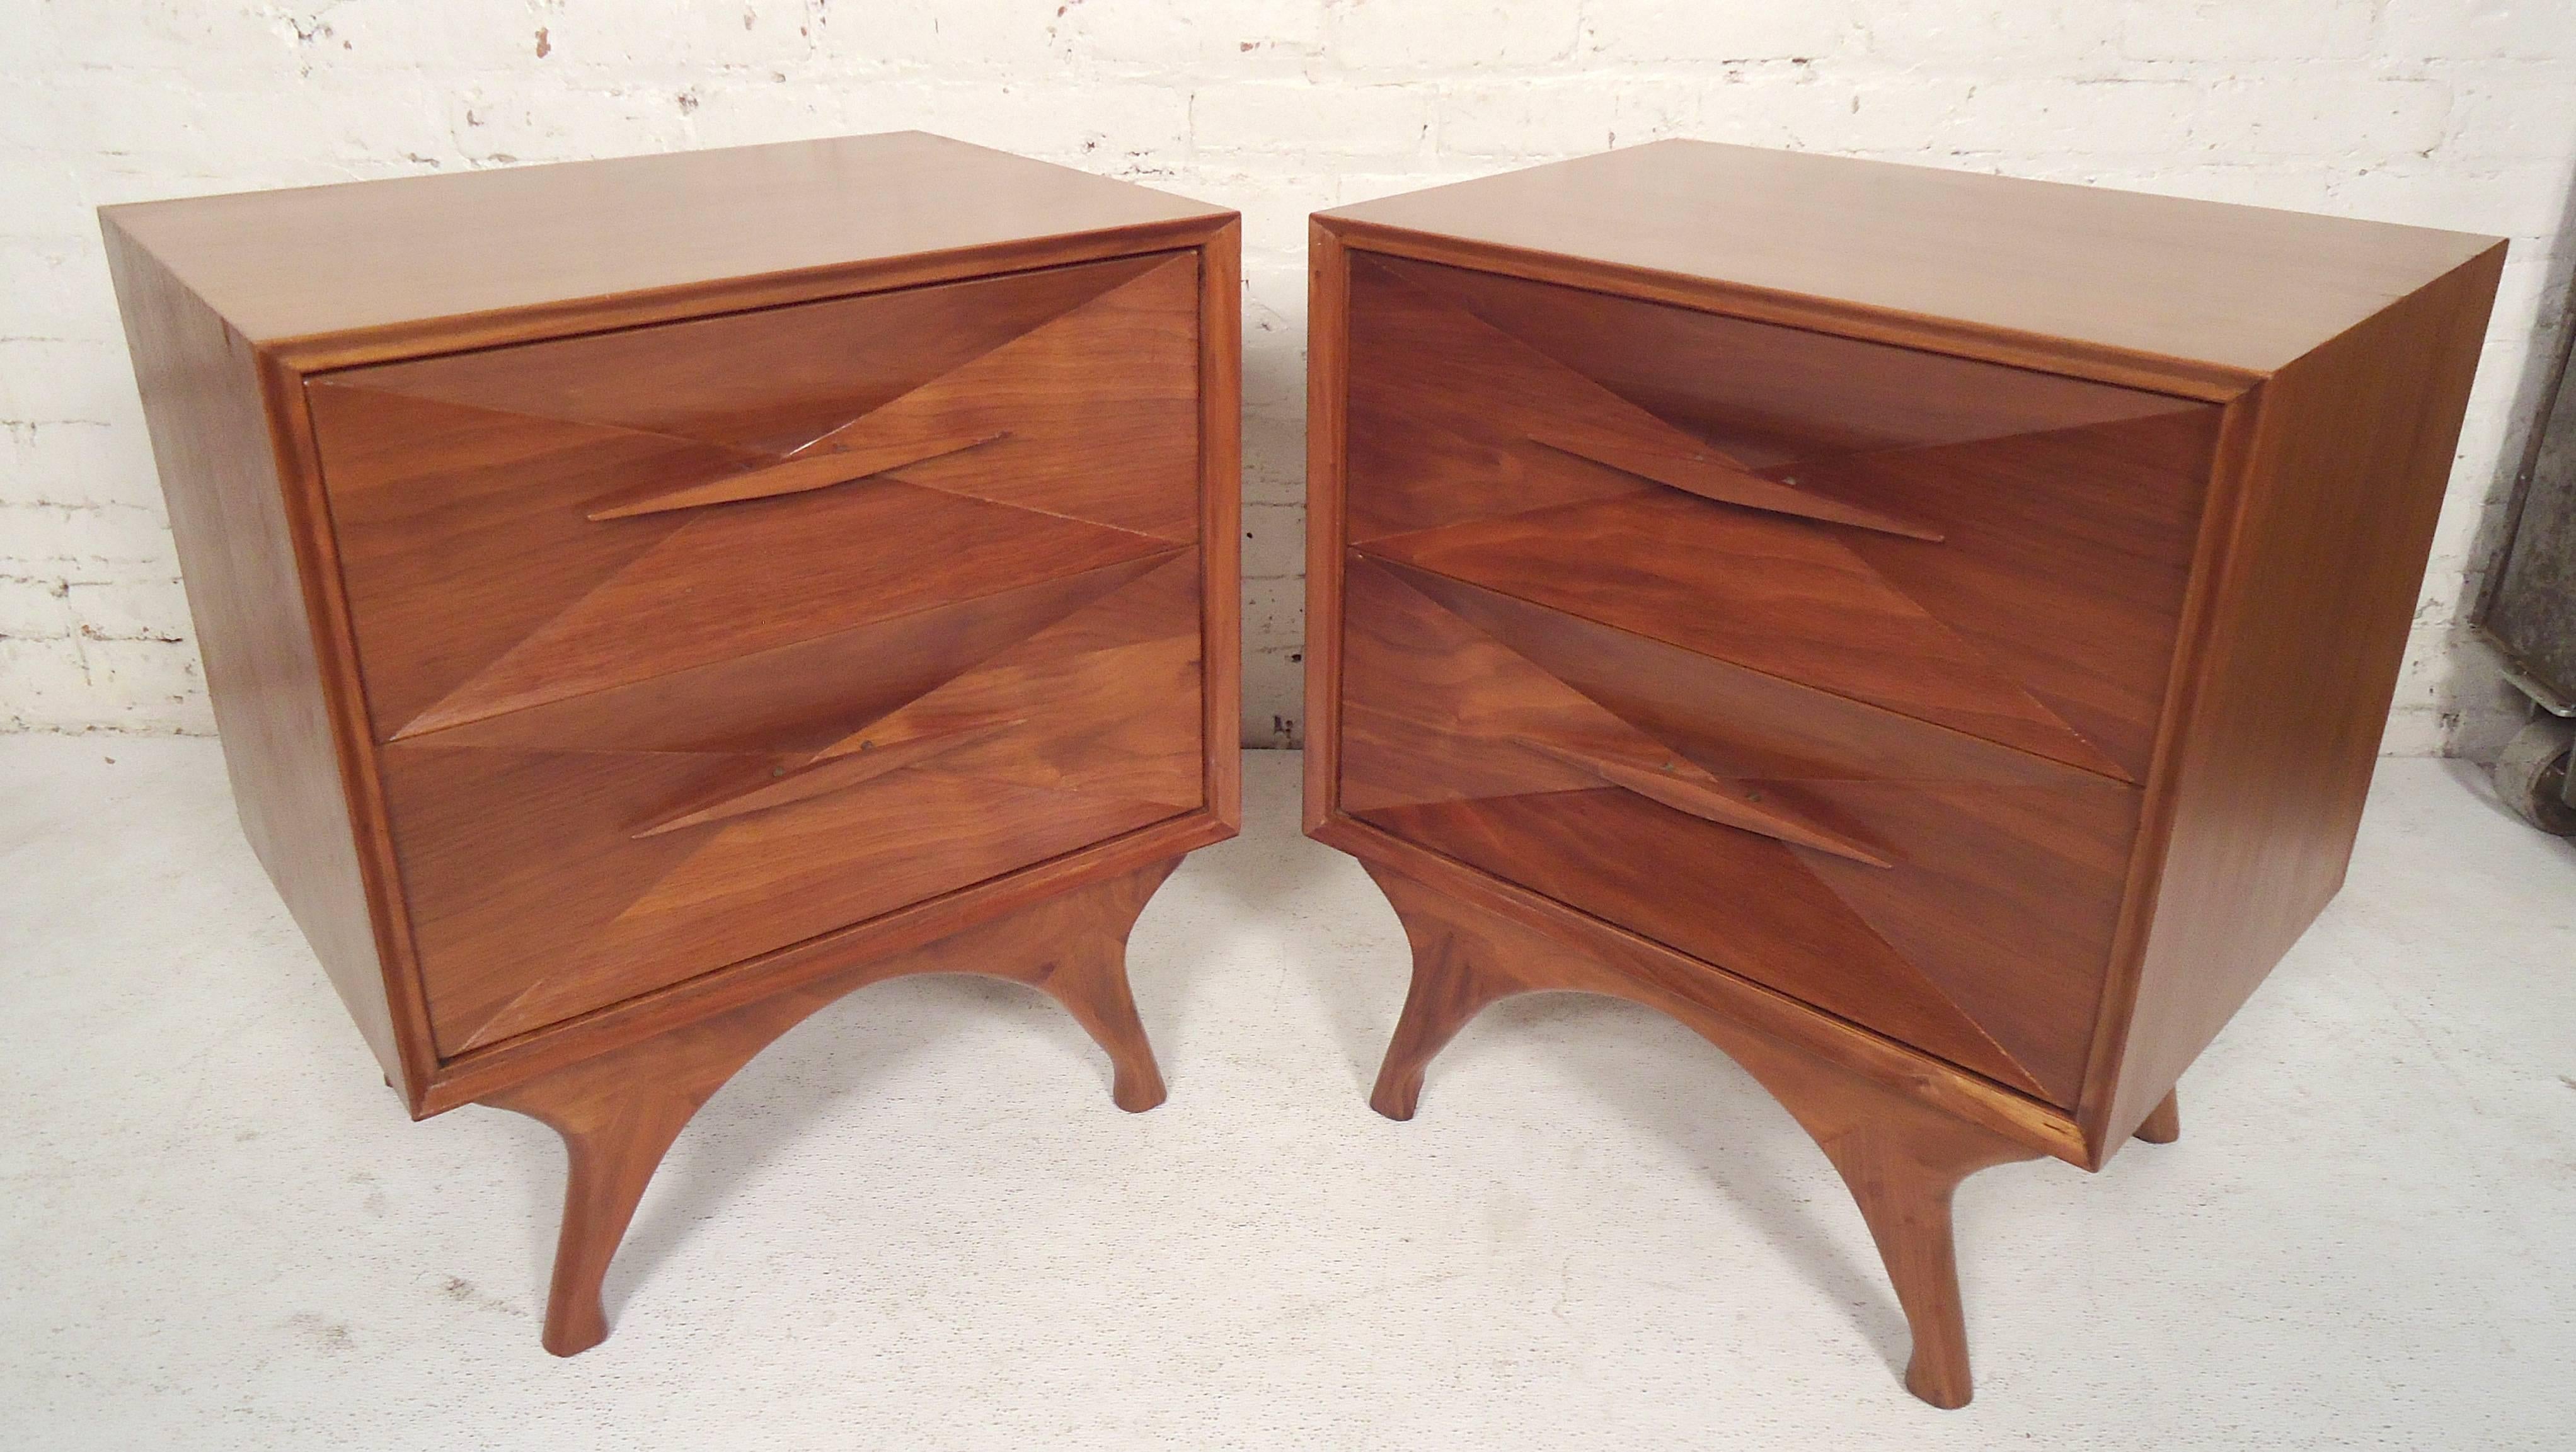 Gorgeous vintage bedside tables with inverted diamond shaped drawers with sculpted wood pulls. Two drawers, walnut grain throughout and unique legs.

(Please confirm item location - NY or NJ - with dealer). 
 